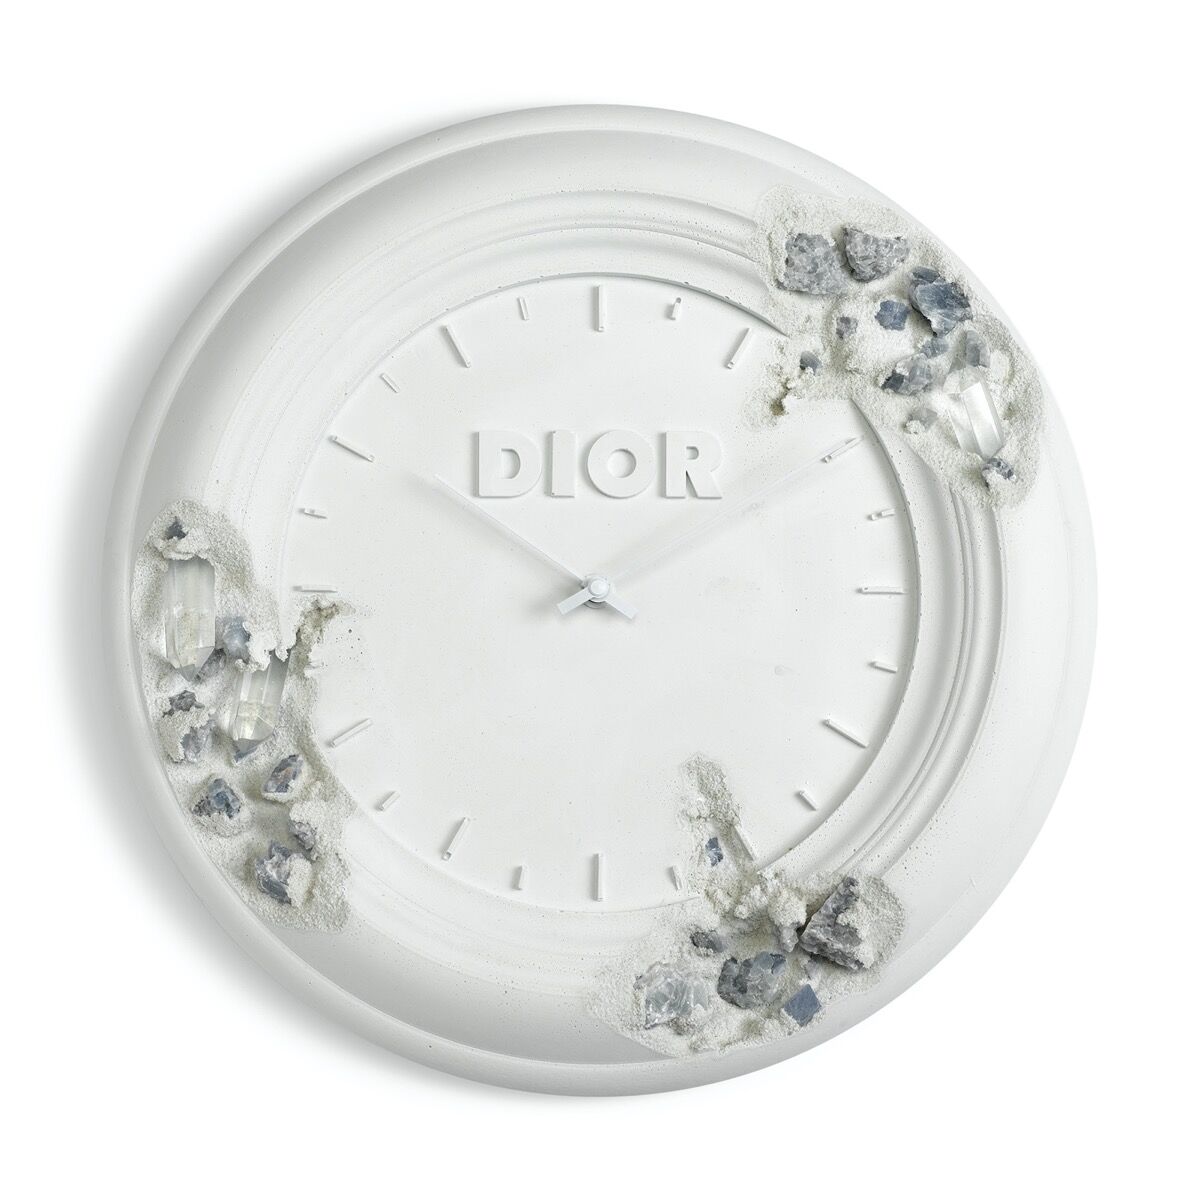 Daniel Arsham x Dior, Future Relic Eroded Clock, 2020. Courtesy of the artist and Christie’s Images Ltd. 2020.